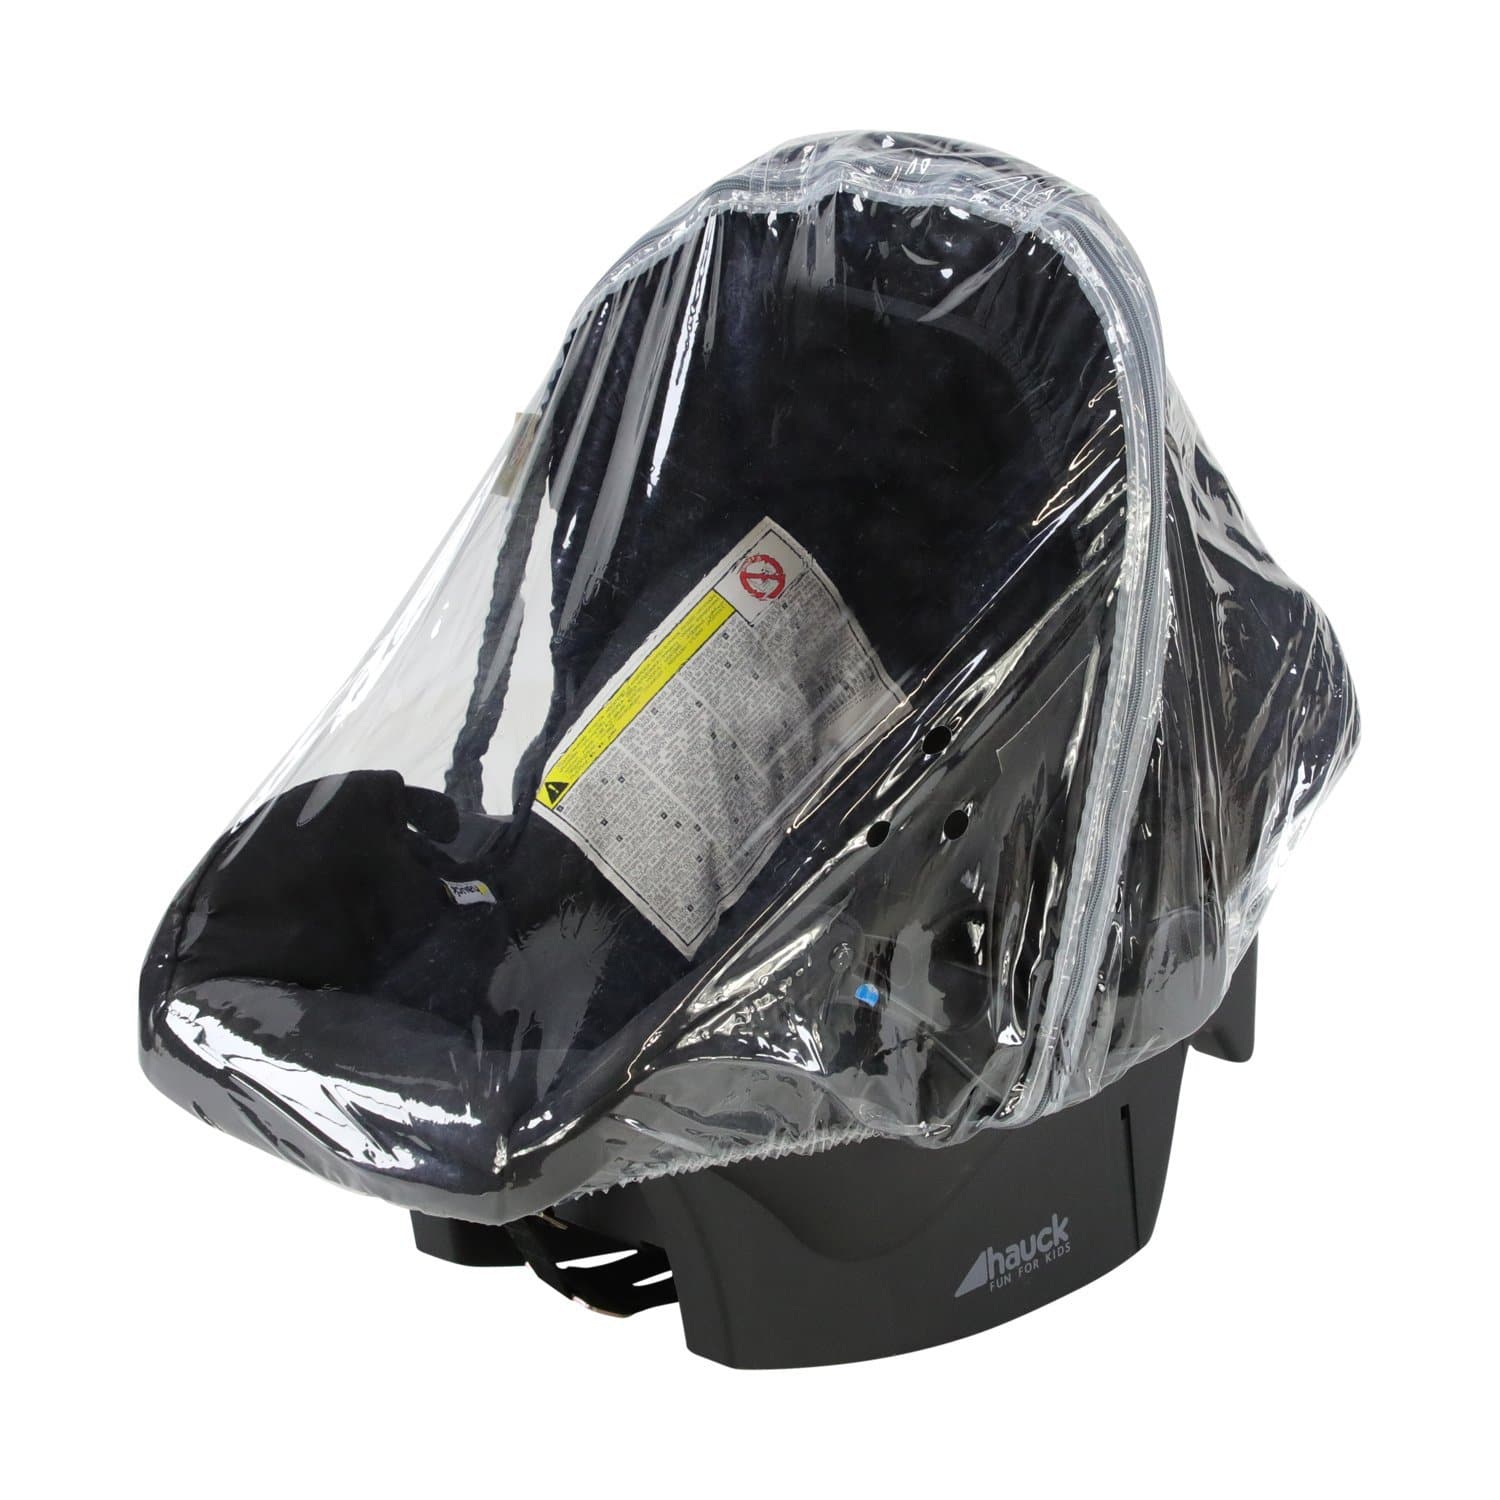 Car Seat Raincover Compatible with Nania - For Your Little One